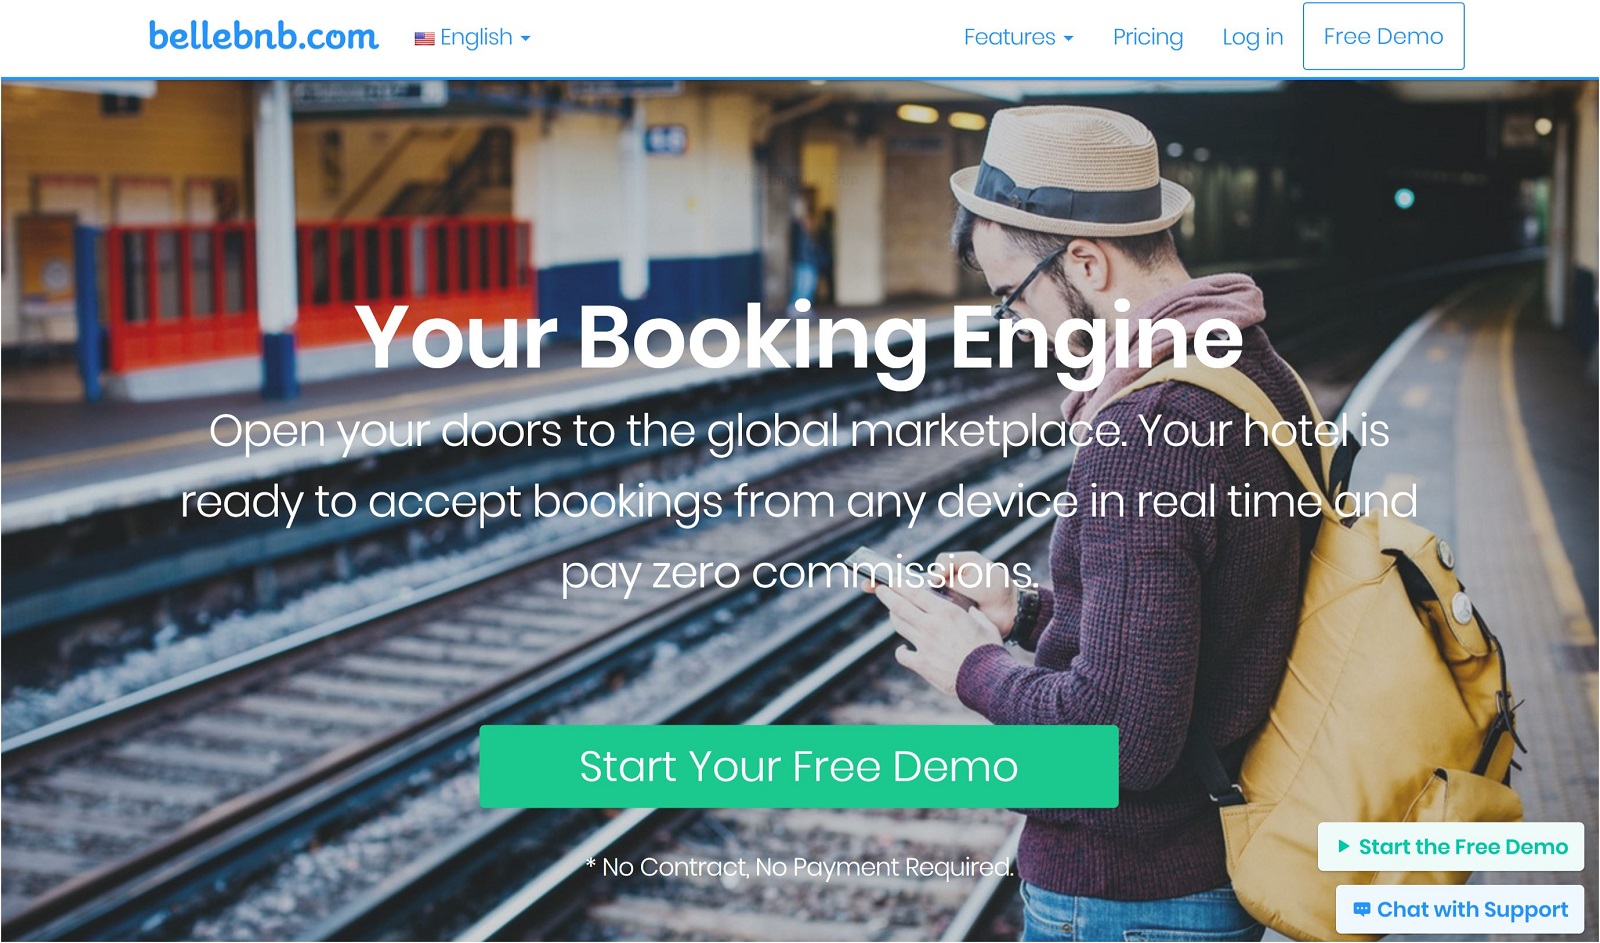 Bellebnb.com Hotel Booking Engine Commission Free!